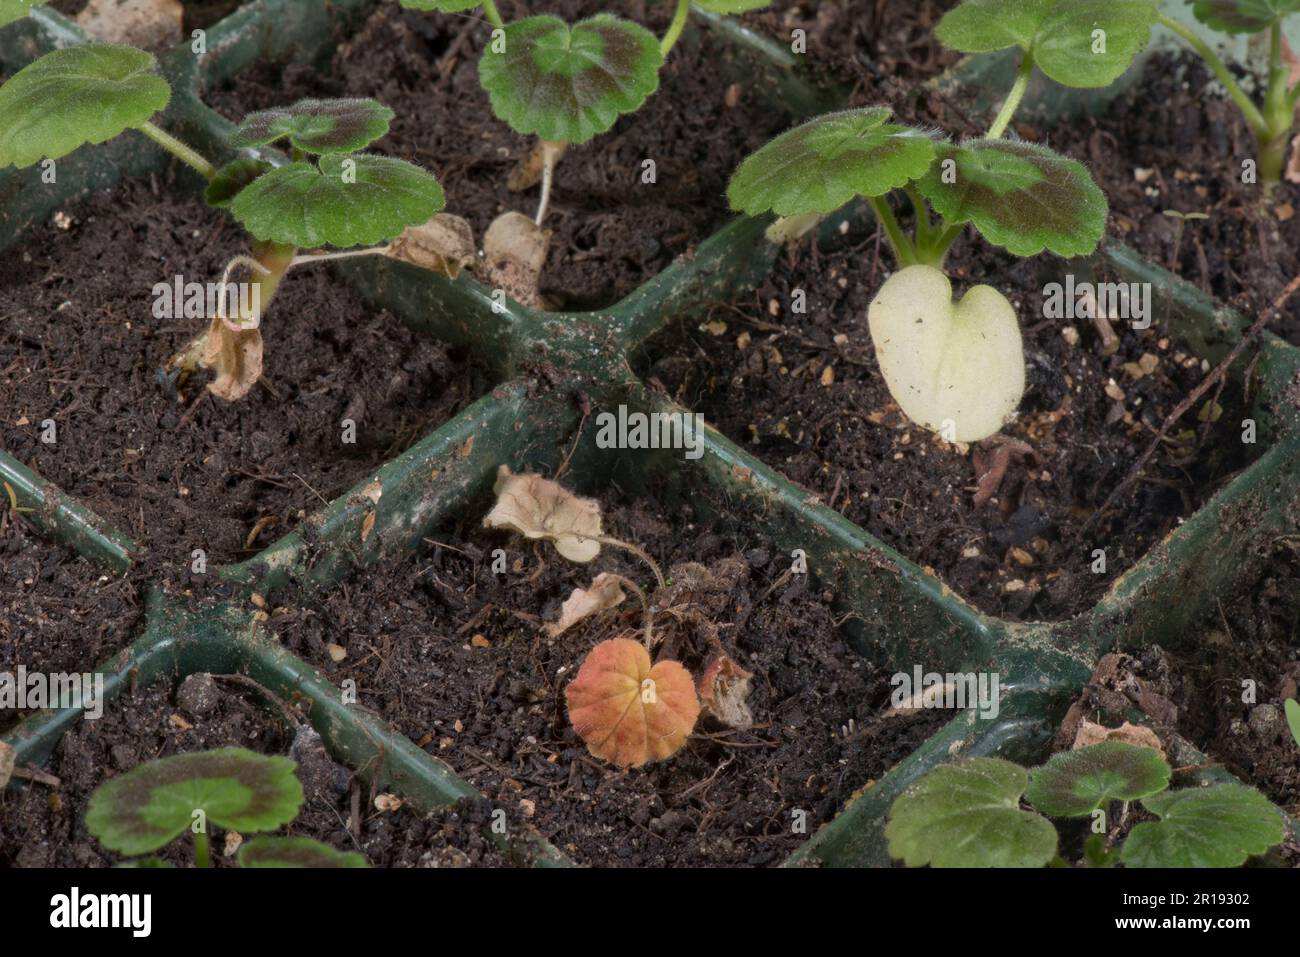 Damping off disease, caused by many possible soil-borne pathogens killing young seedling pelargoniums (Pelargomium zonalis) in seedd cells Stock Photo